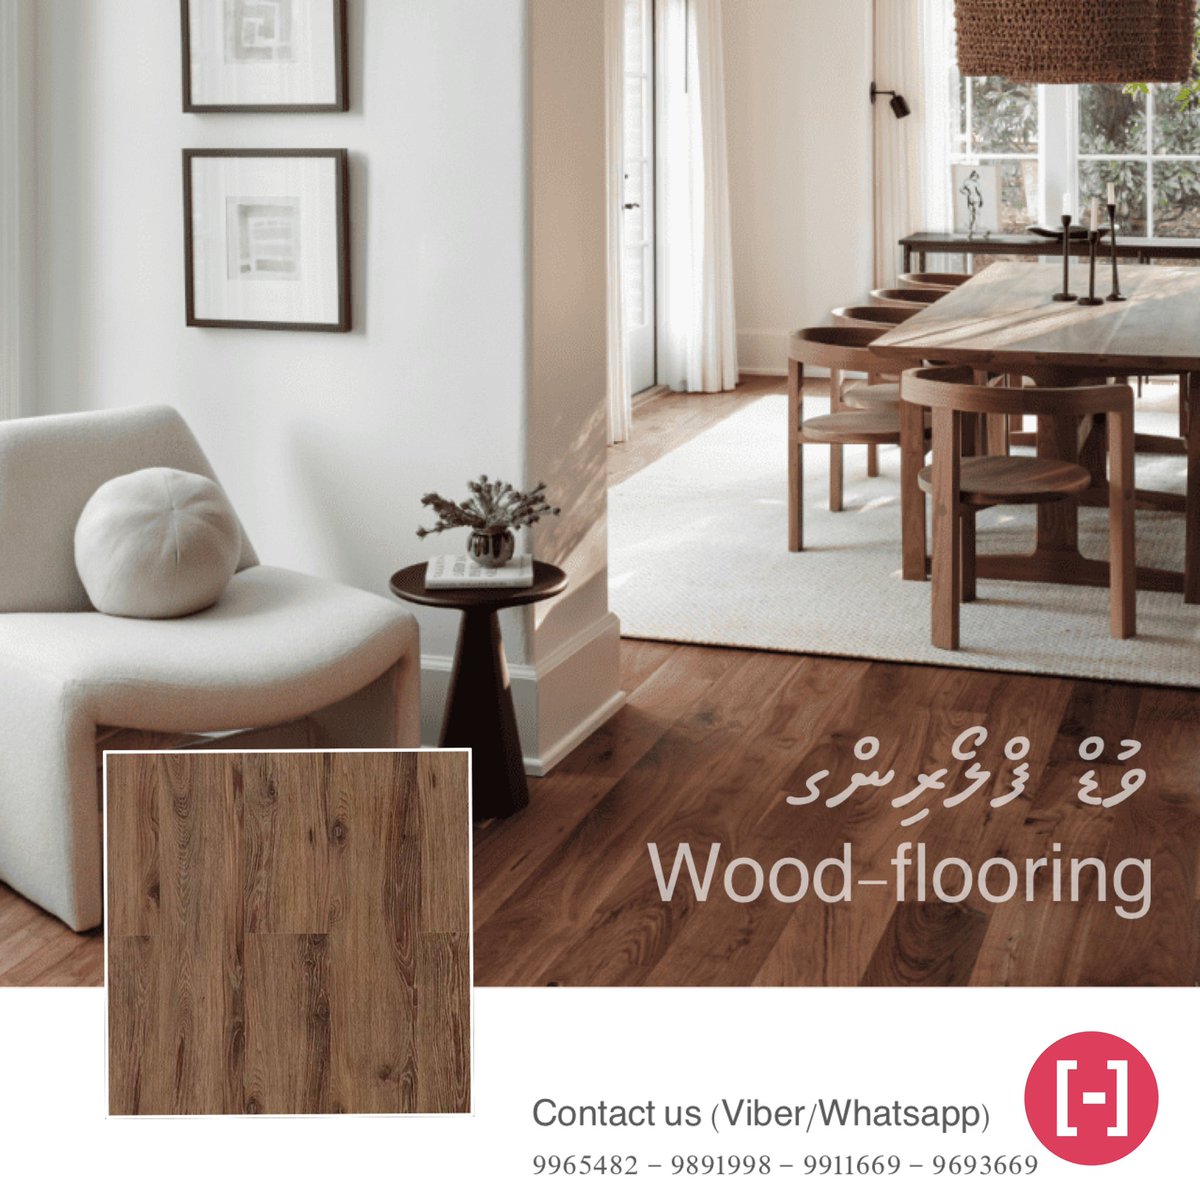 Explore our NEW laminated wood flooring range for a luxurious, authentic wood finish to your home. #woodflooring #habitatmv 

Contact us (Viber/Whatsapp) 
9965482 - 9891998 - 9911669 - 9693669